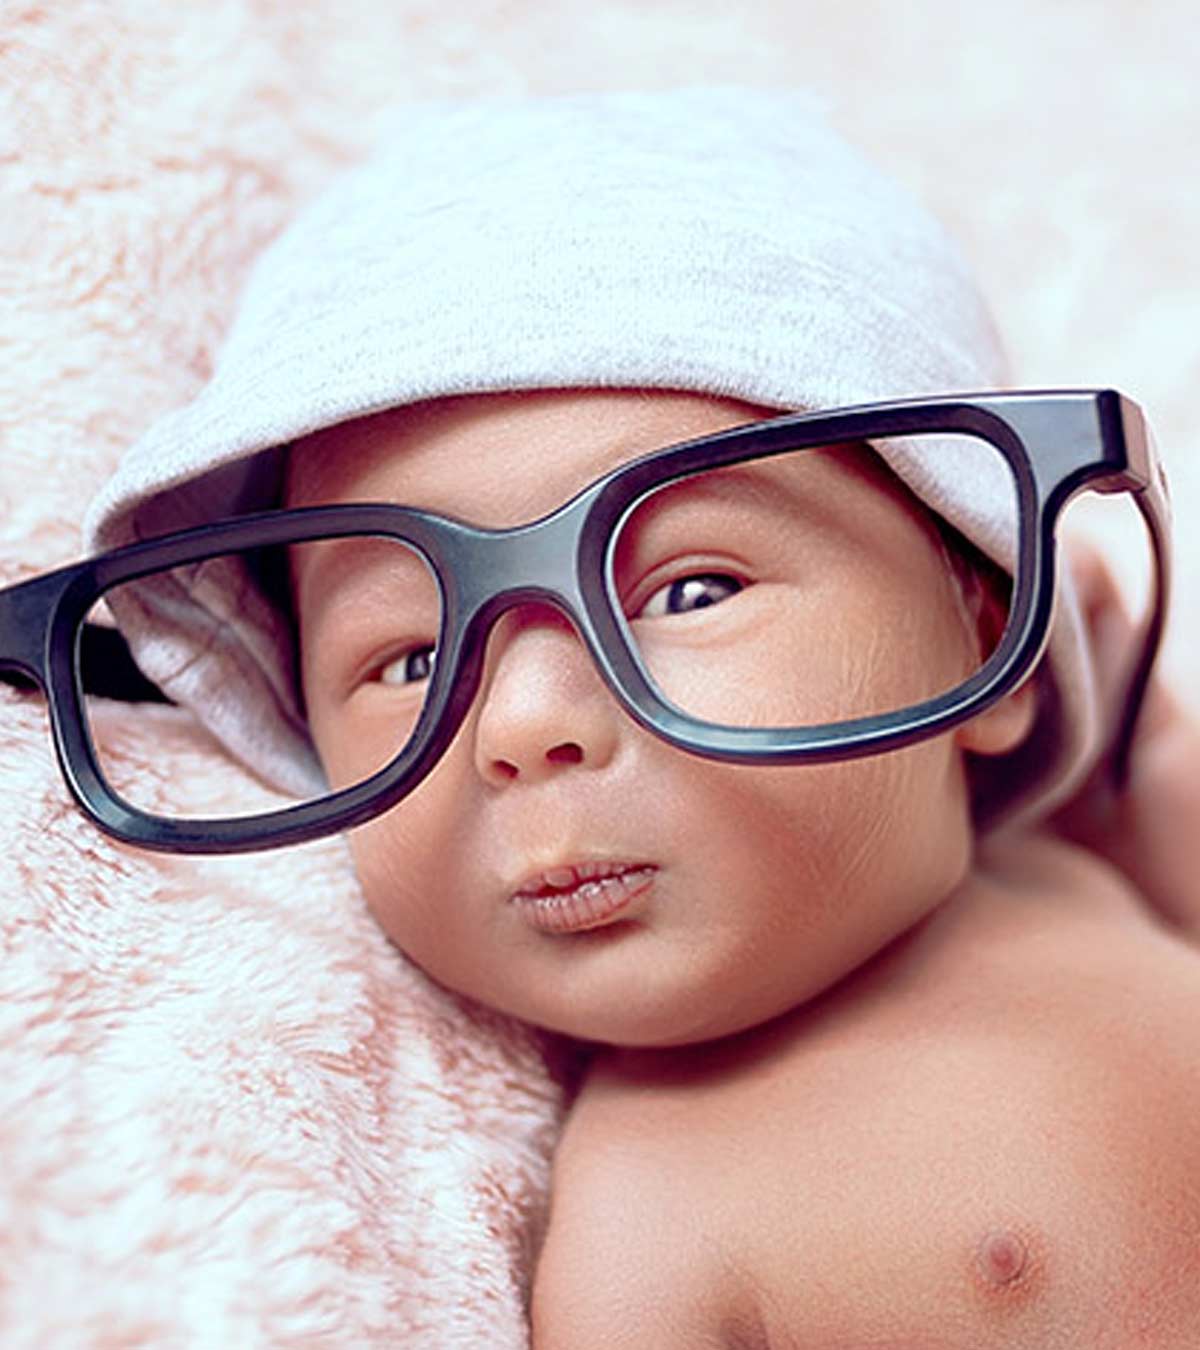 Top 38 Unusual And Eccentric Baby Names For Boys And Girls